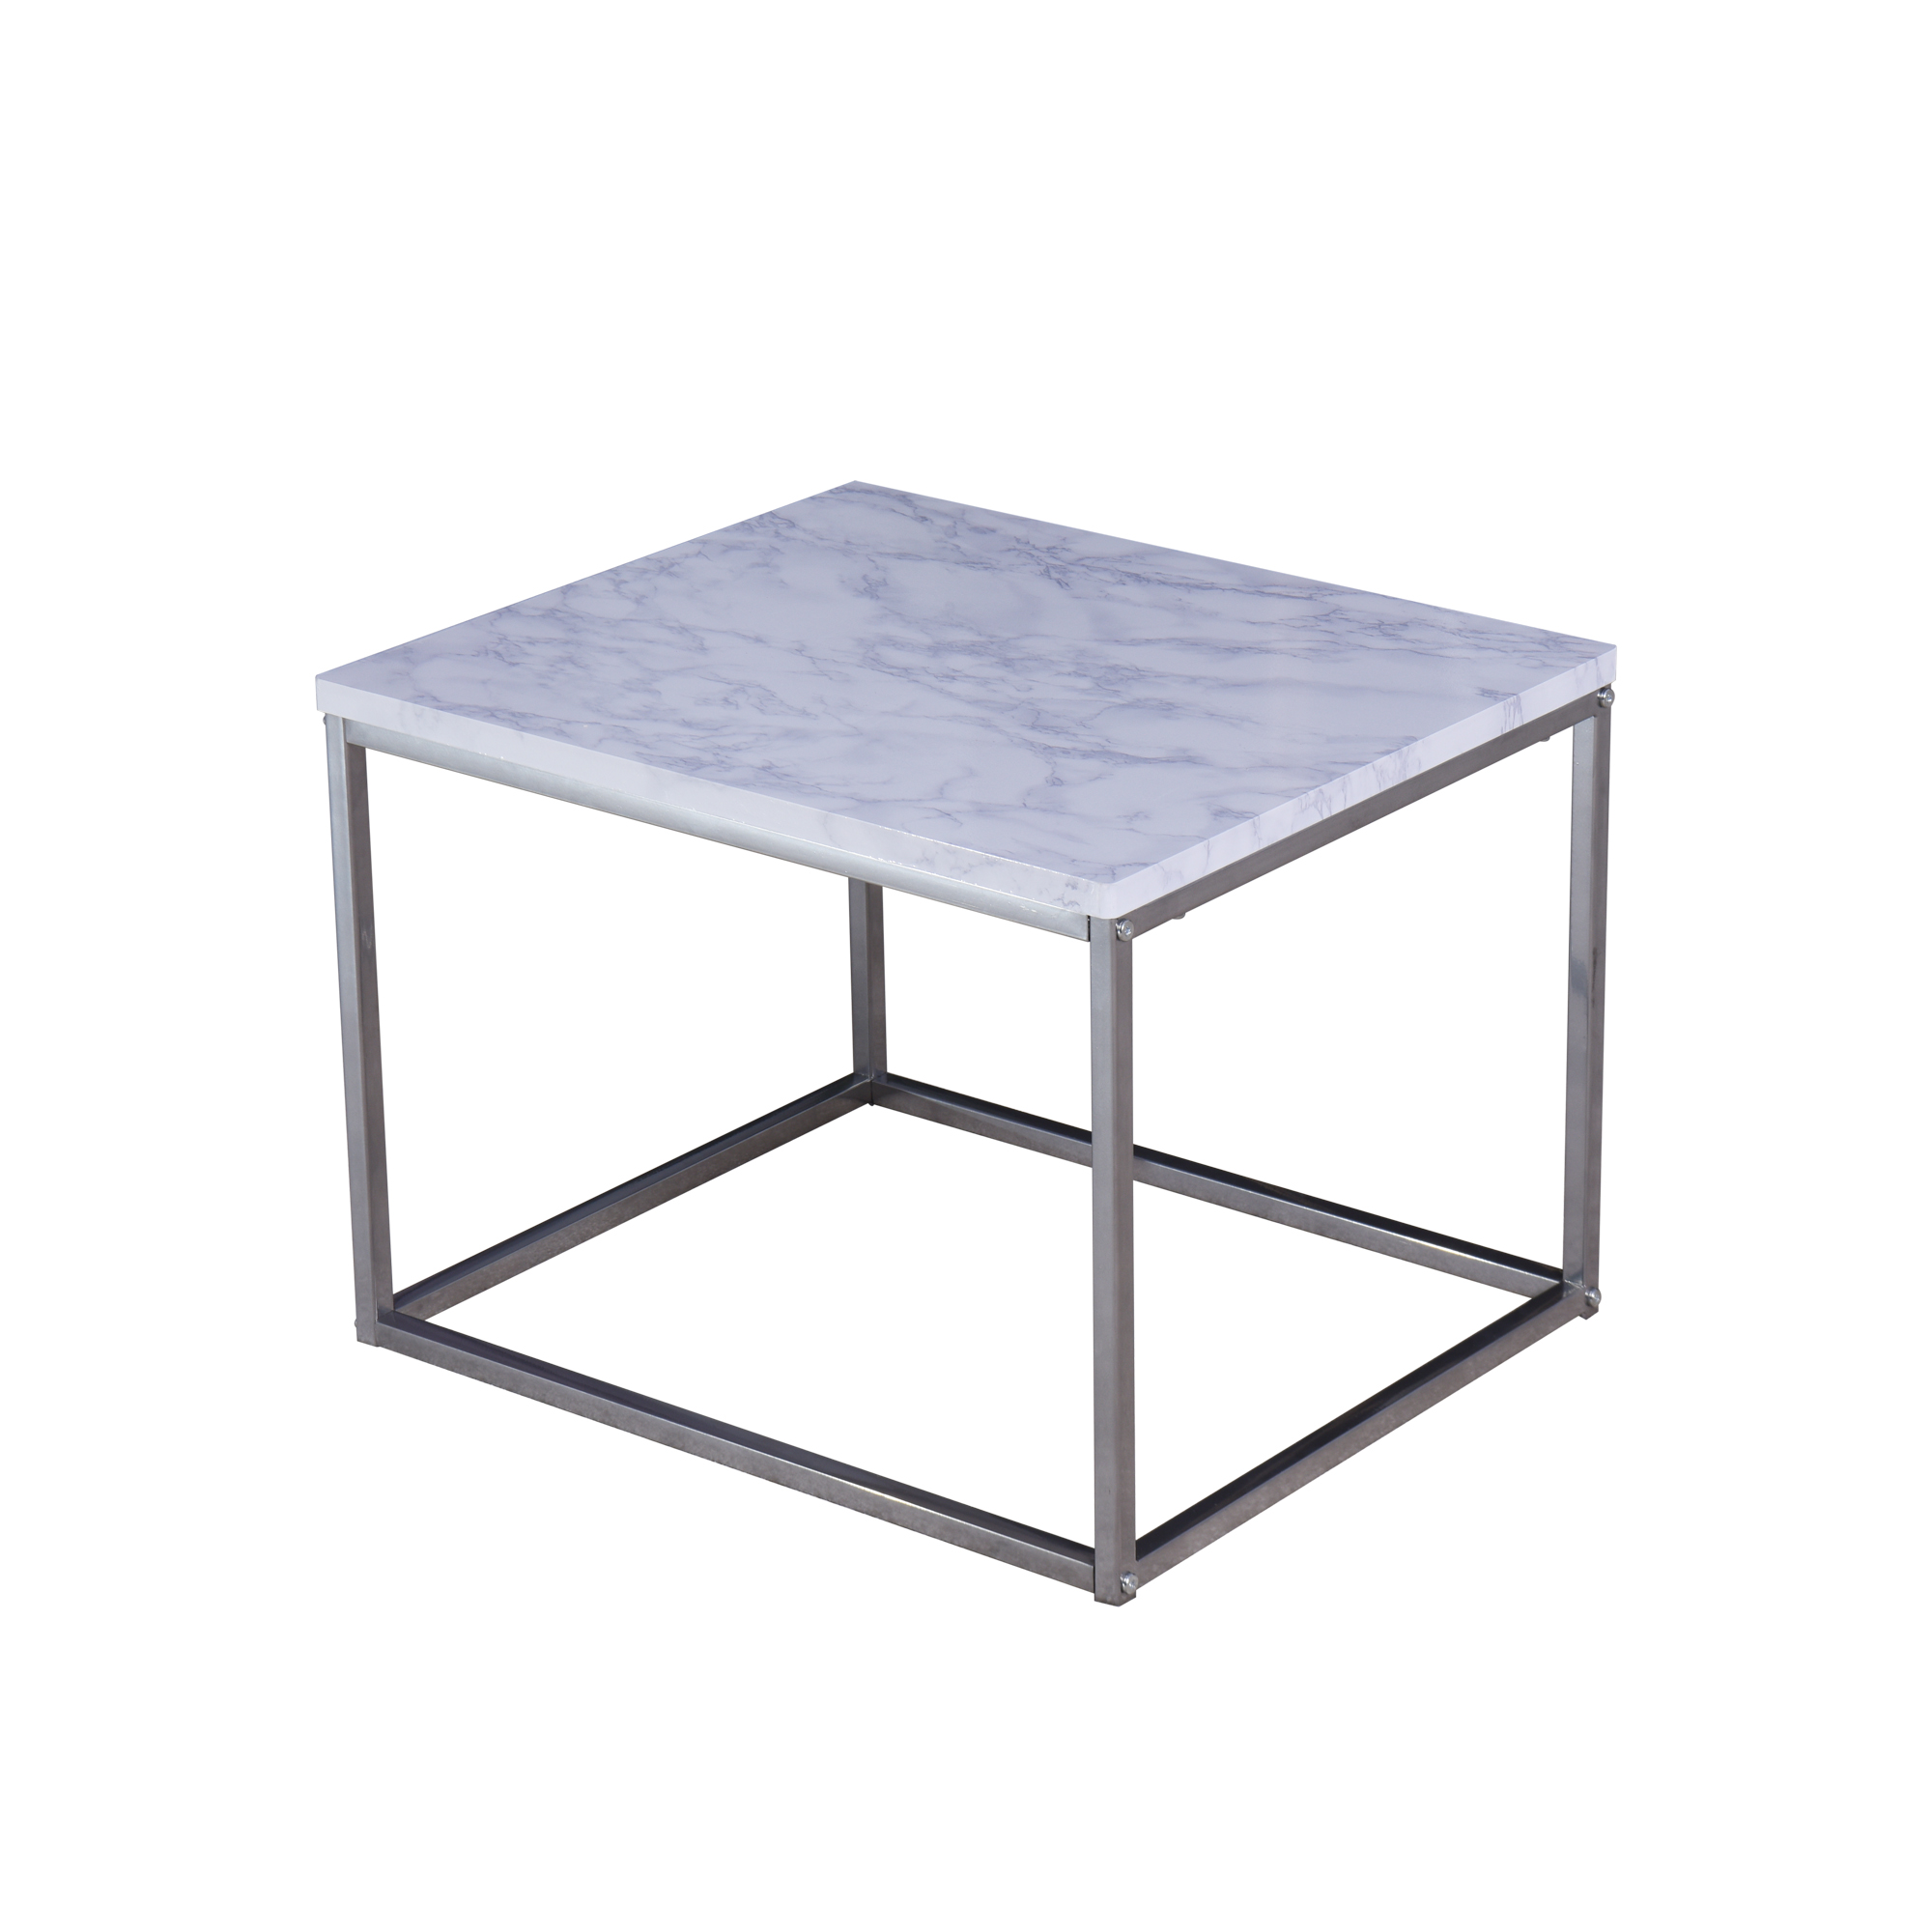 Living Room White Coffee Table with MDF Top, Nesting Table with Metal Legs 17.71 x 20.87 x 15.36 inch-Boyel Living